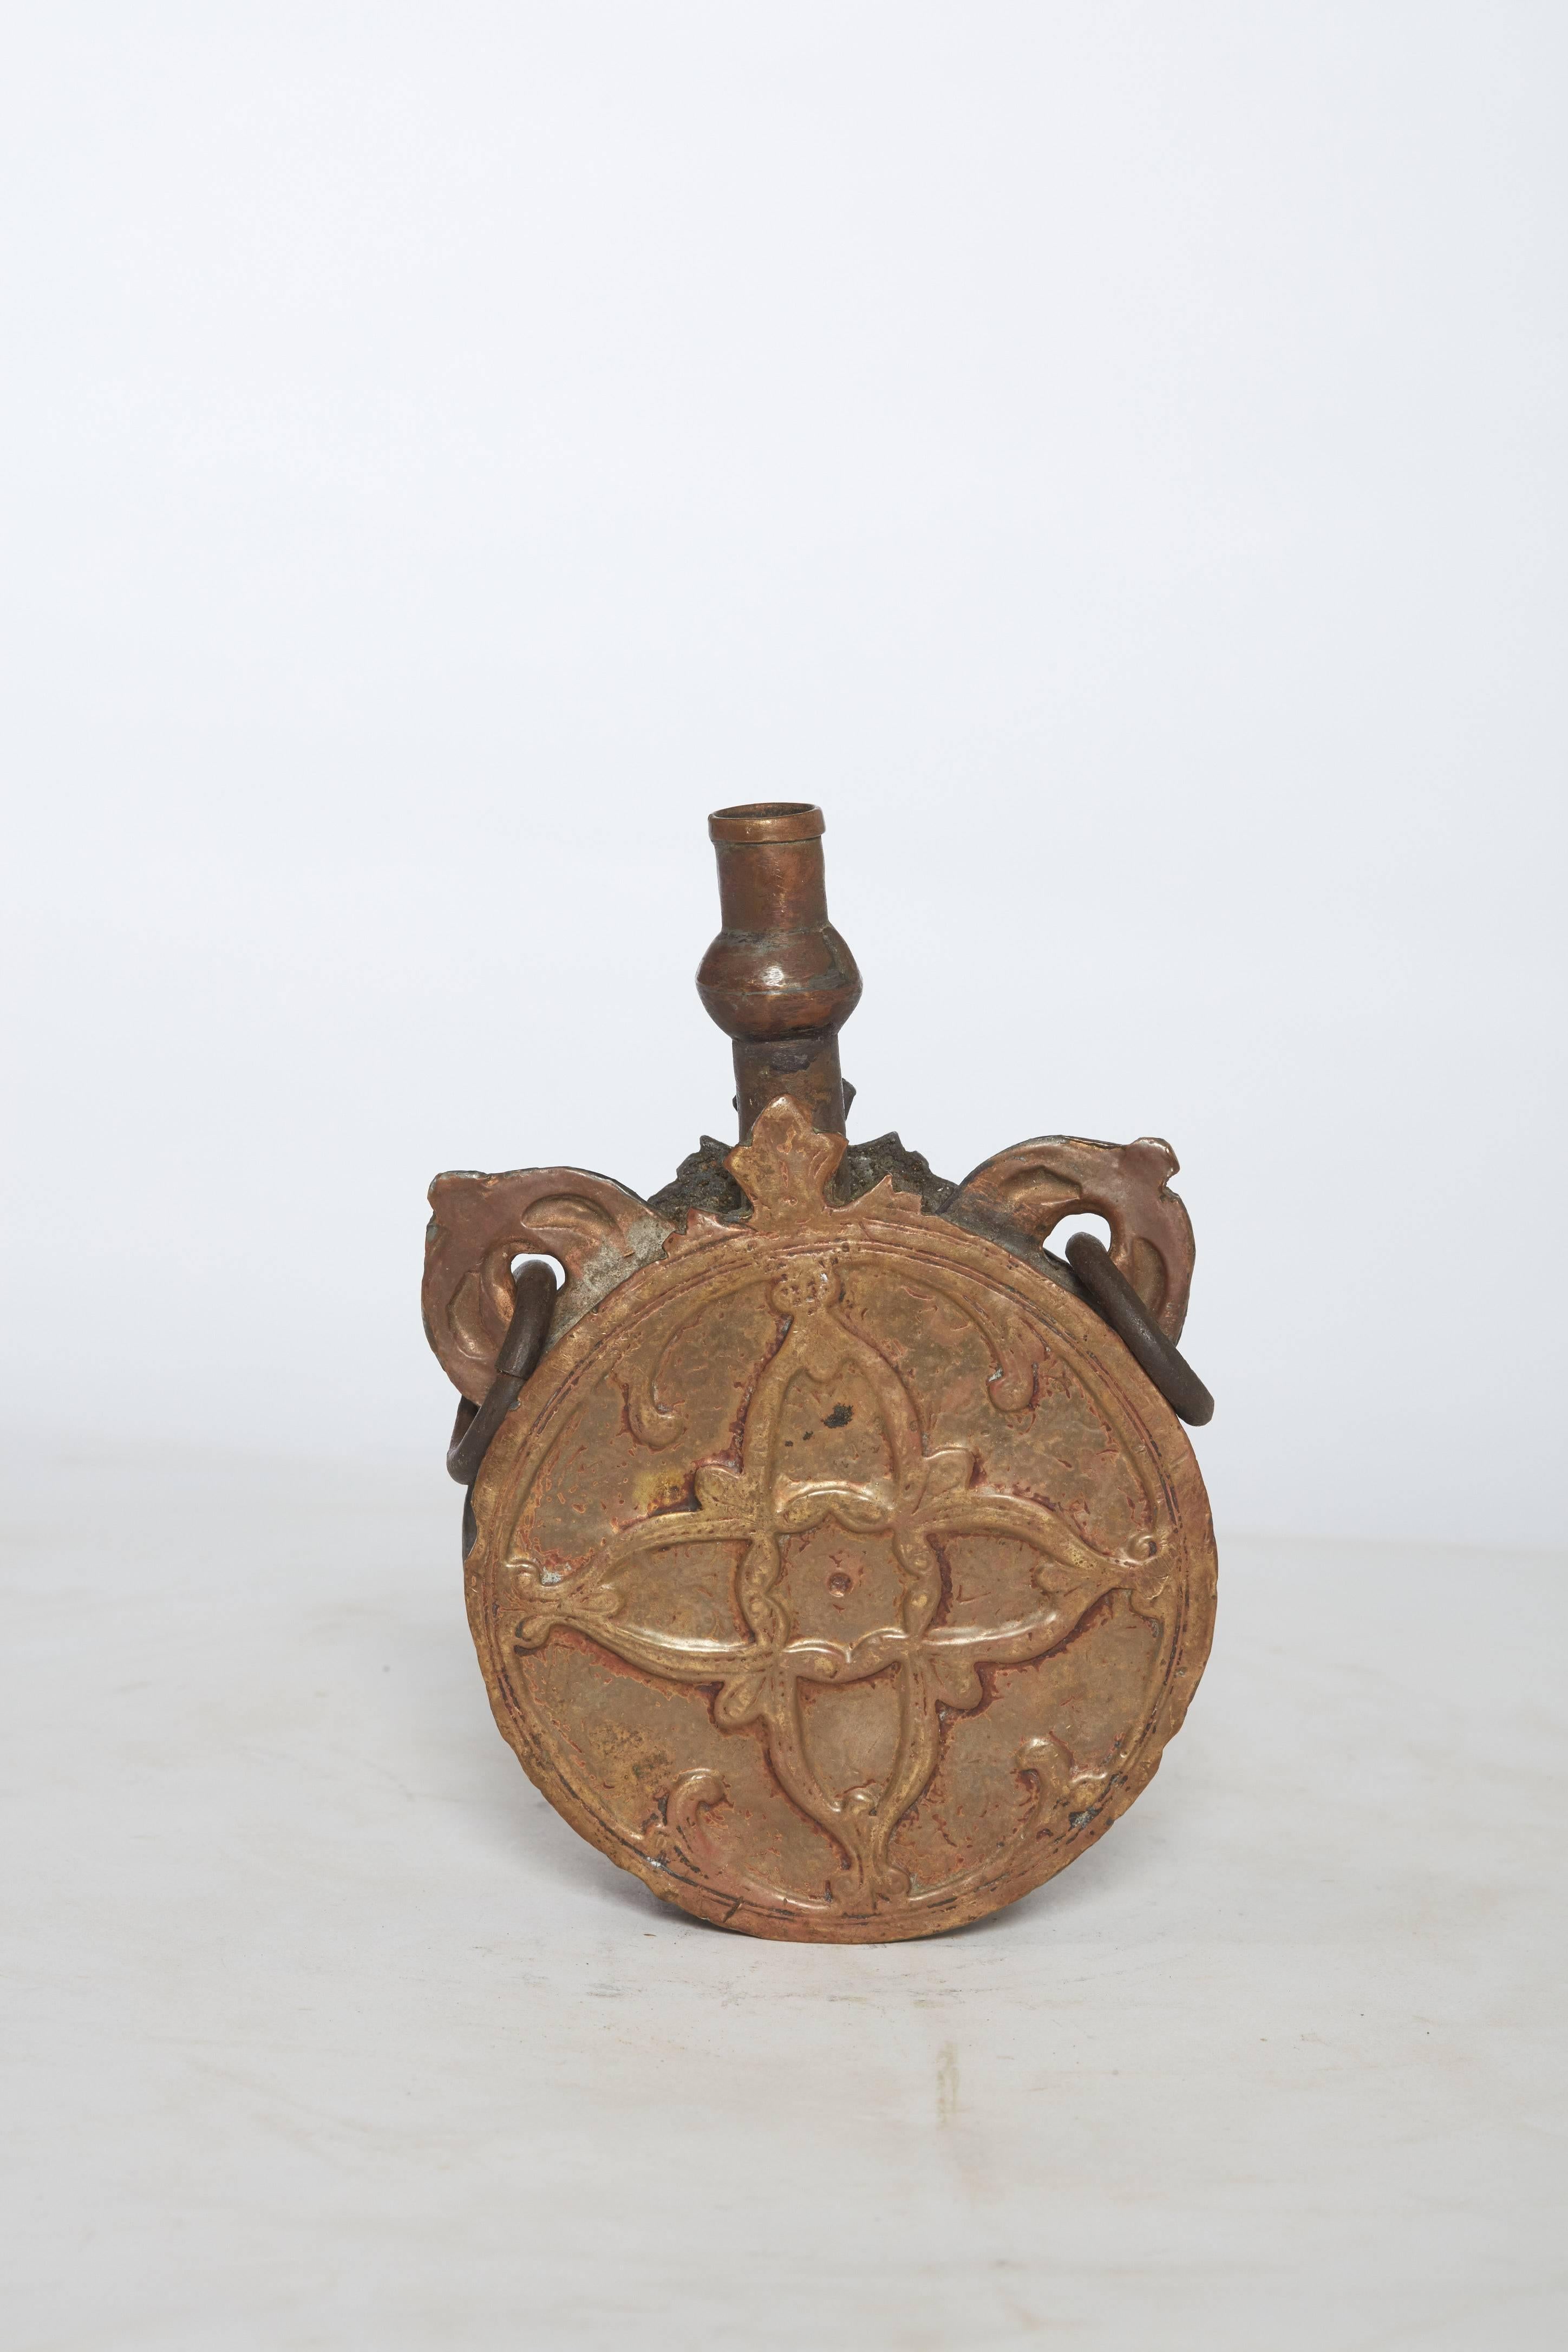 19th century Turkish bronze vessel/flask with ornate detailing



Dimensions: 6.63 in. H total; body of piece is 5 in H x 4.25 in W (circular part). The hooks are 1 in. up from the circular part.